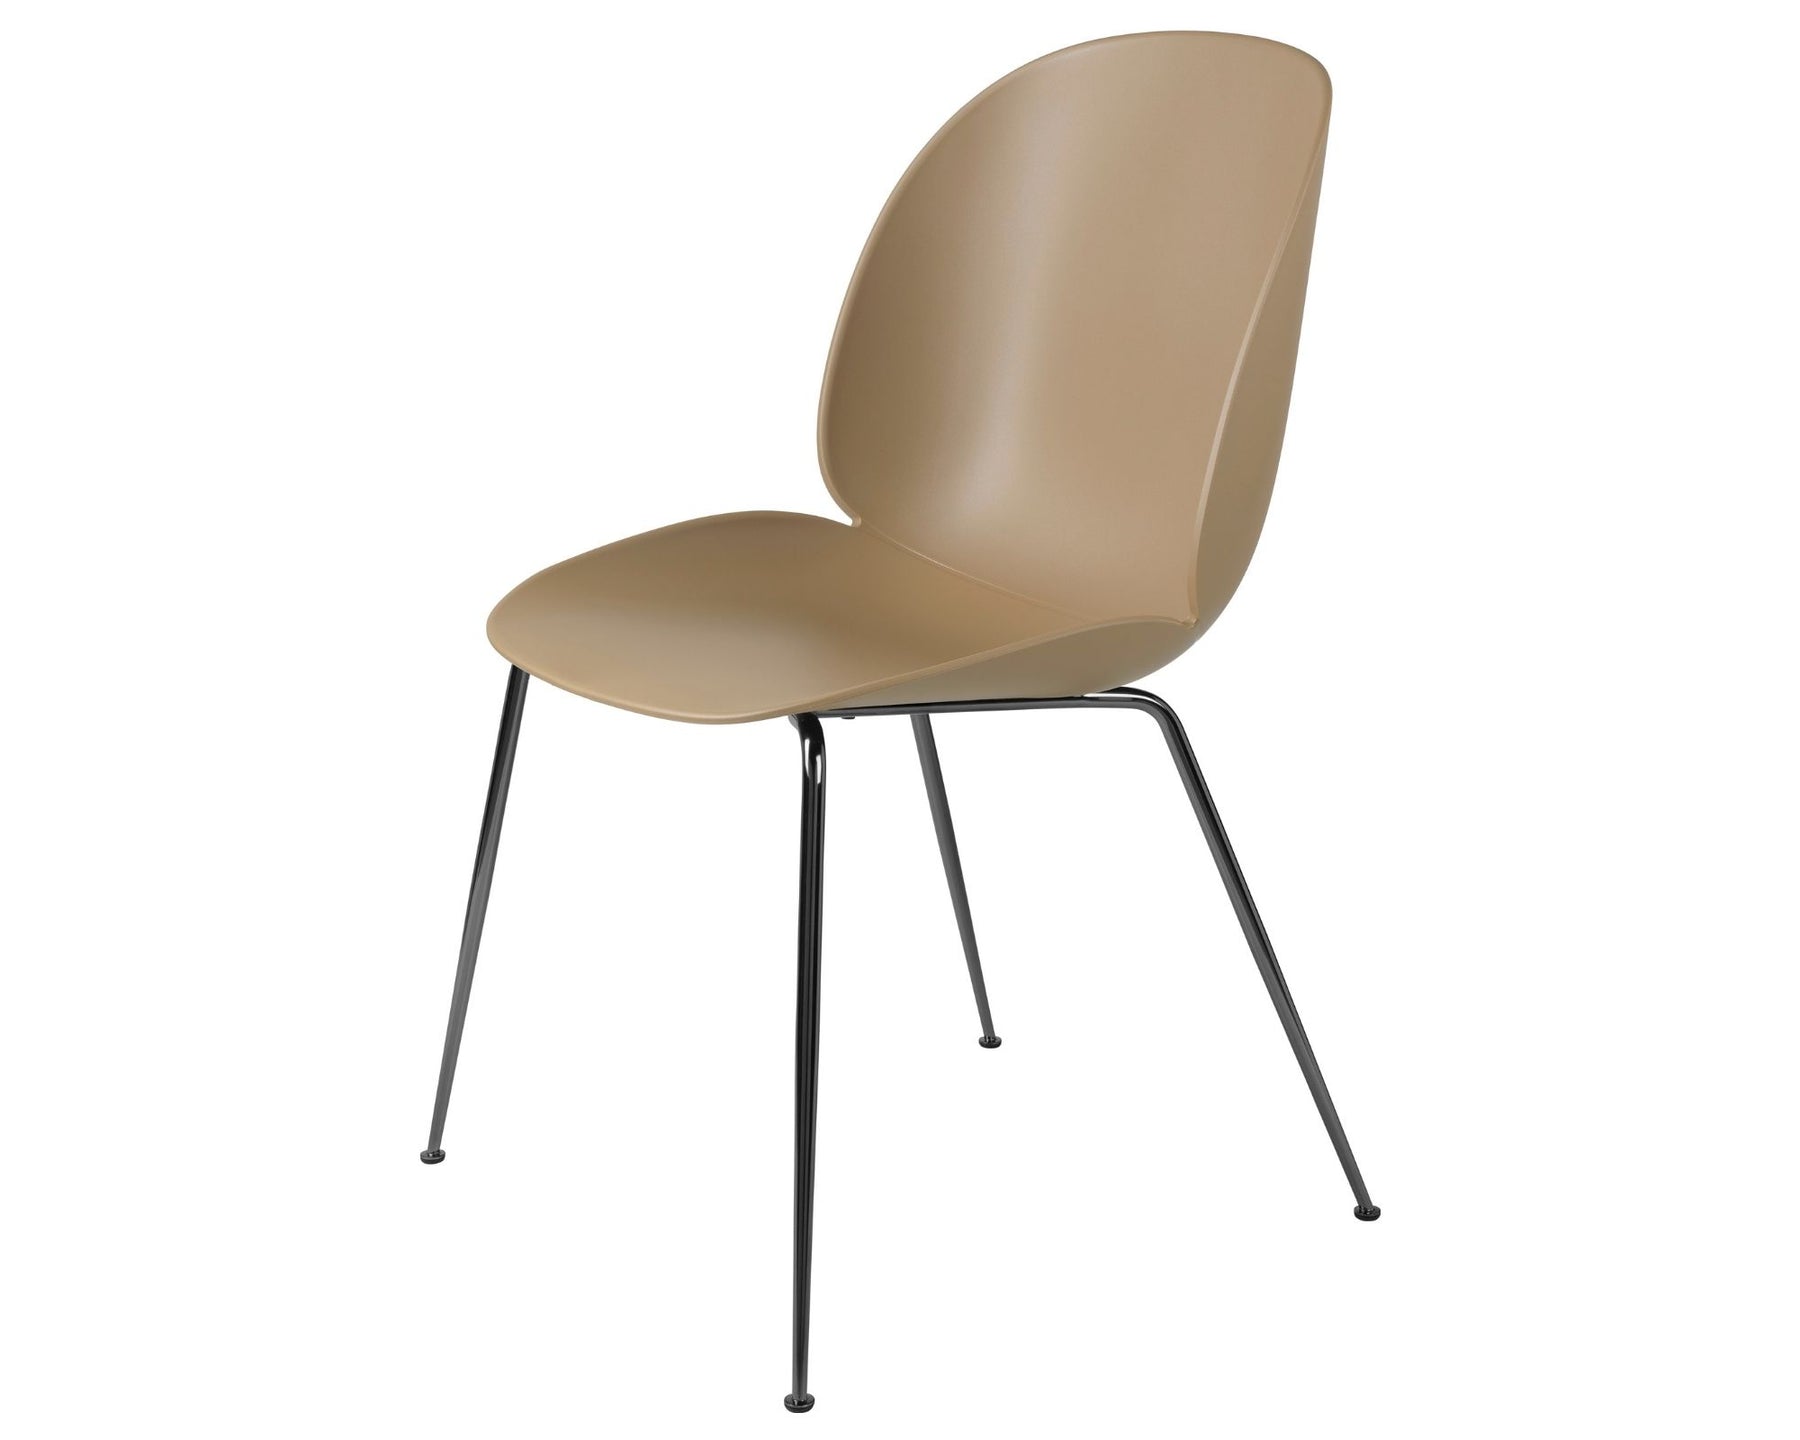 Pebble Brown Dining Chair with Black Chrome Base | DSHOP